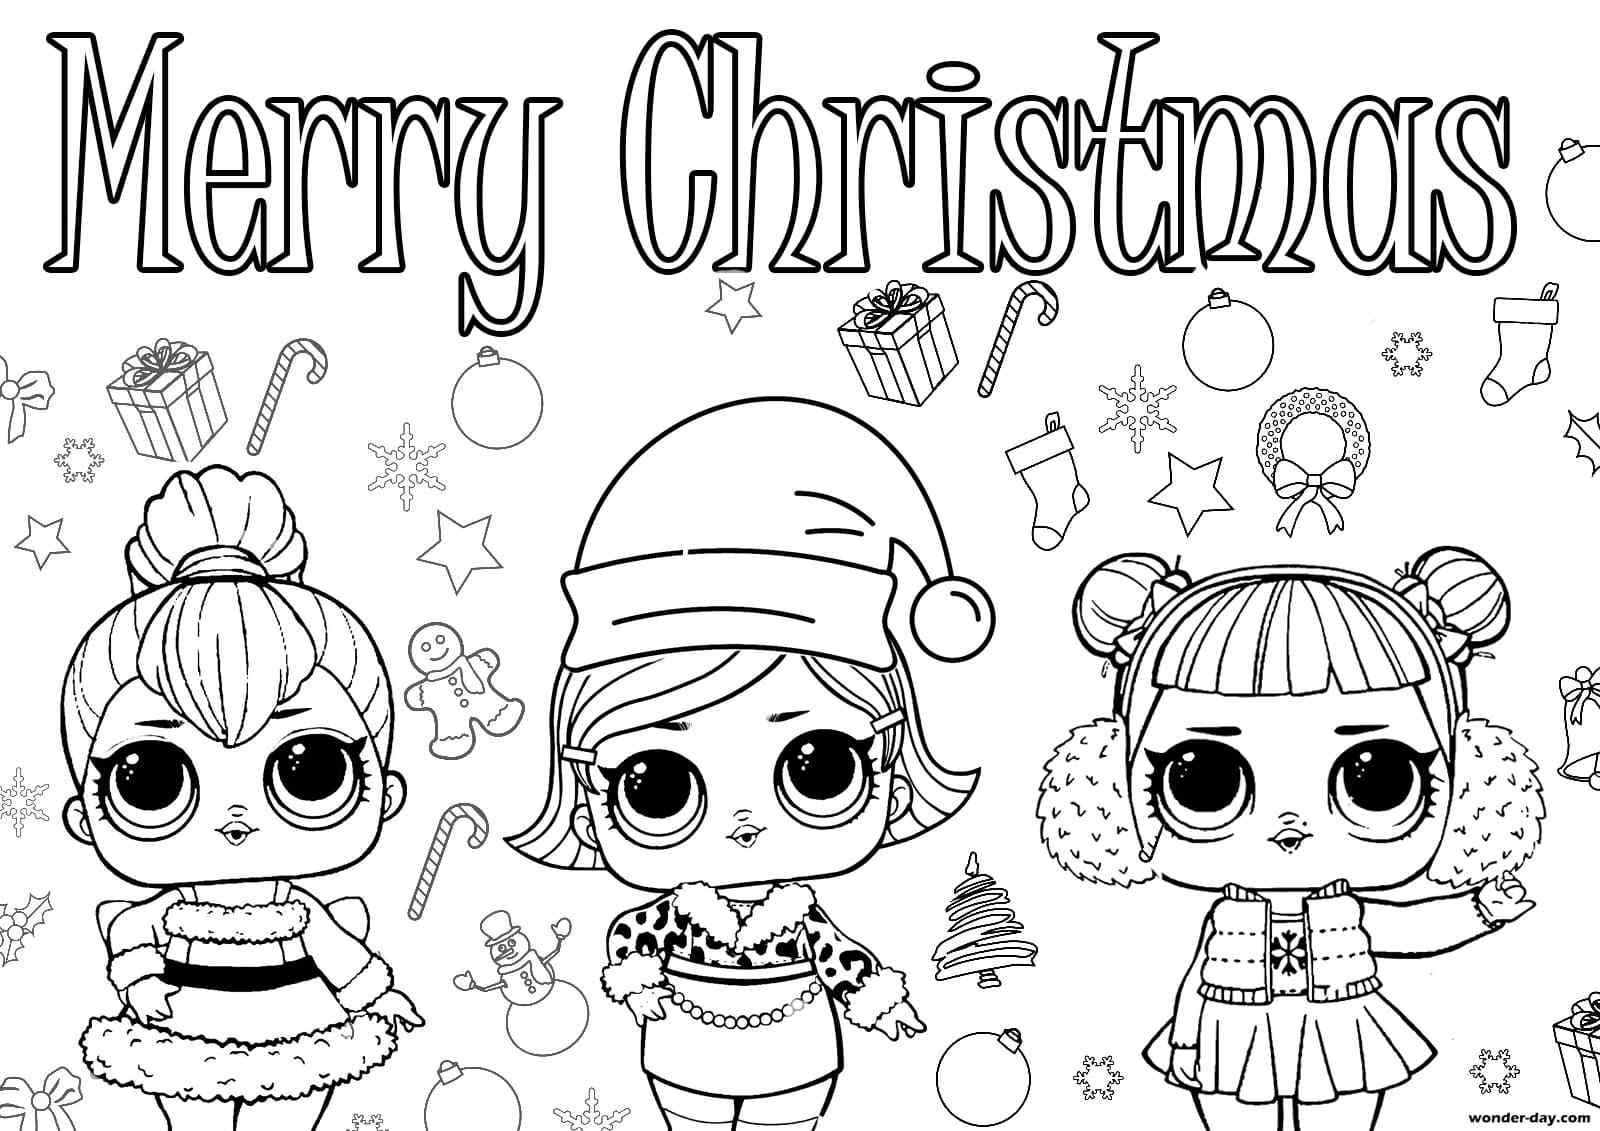 LOL Dolls In Christmas Outfits Coloring Page